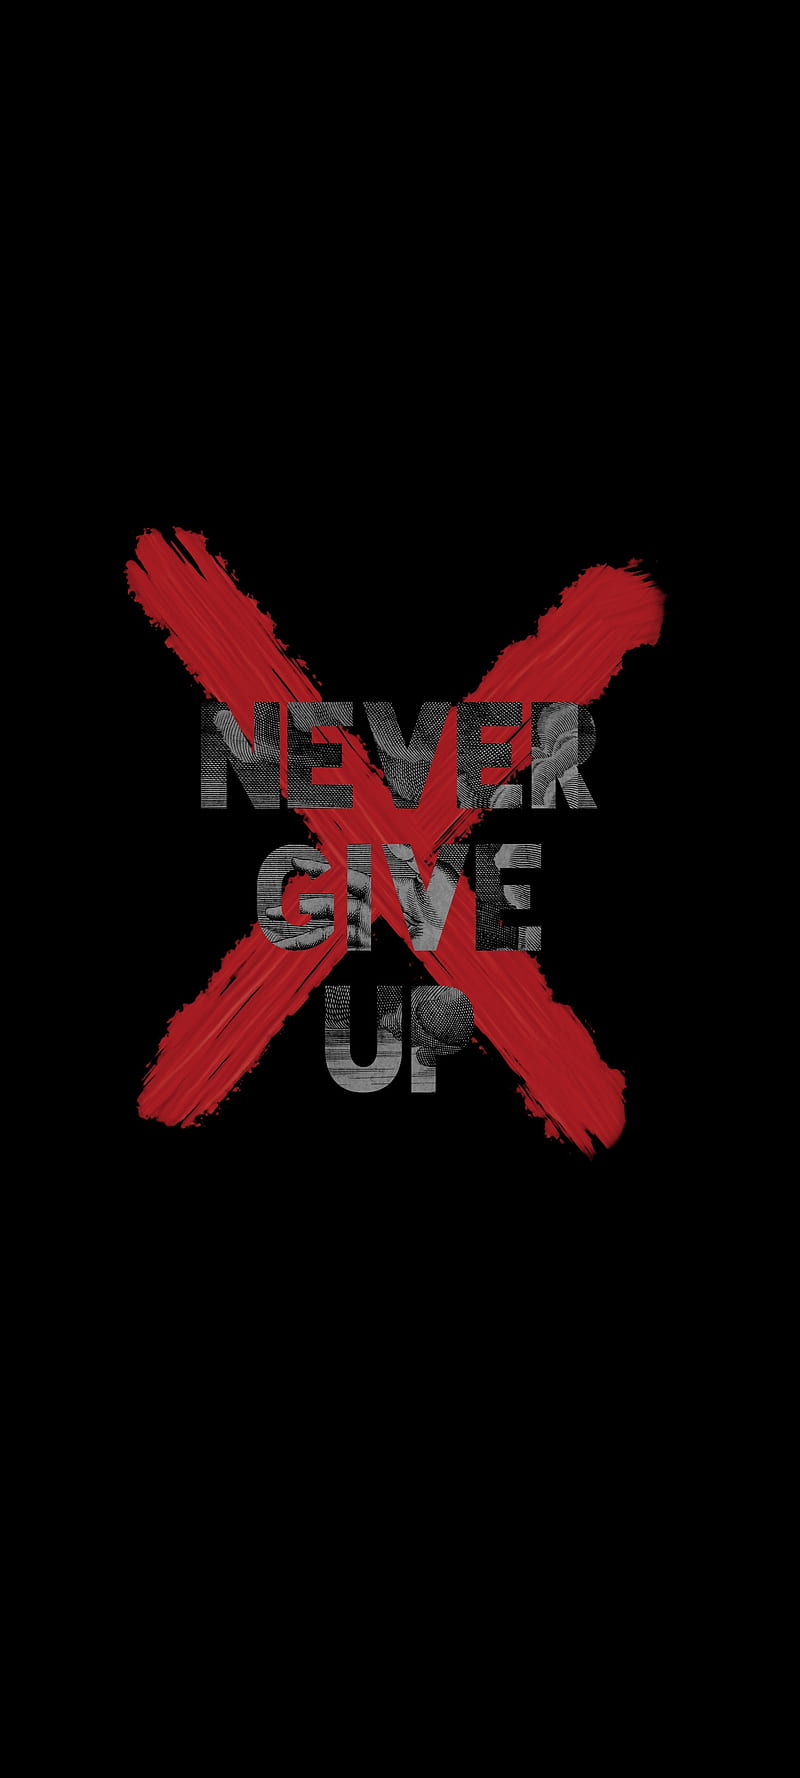 Never Give Up, nevergiveup, fitness, motivation, gym, bodybuilding, powerlifting, HD phone wallpaper